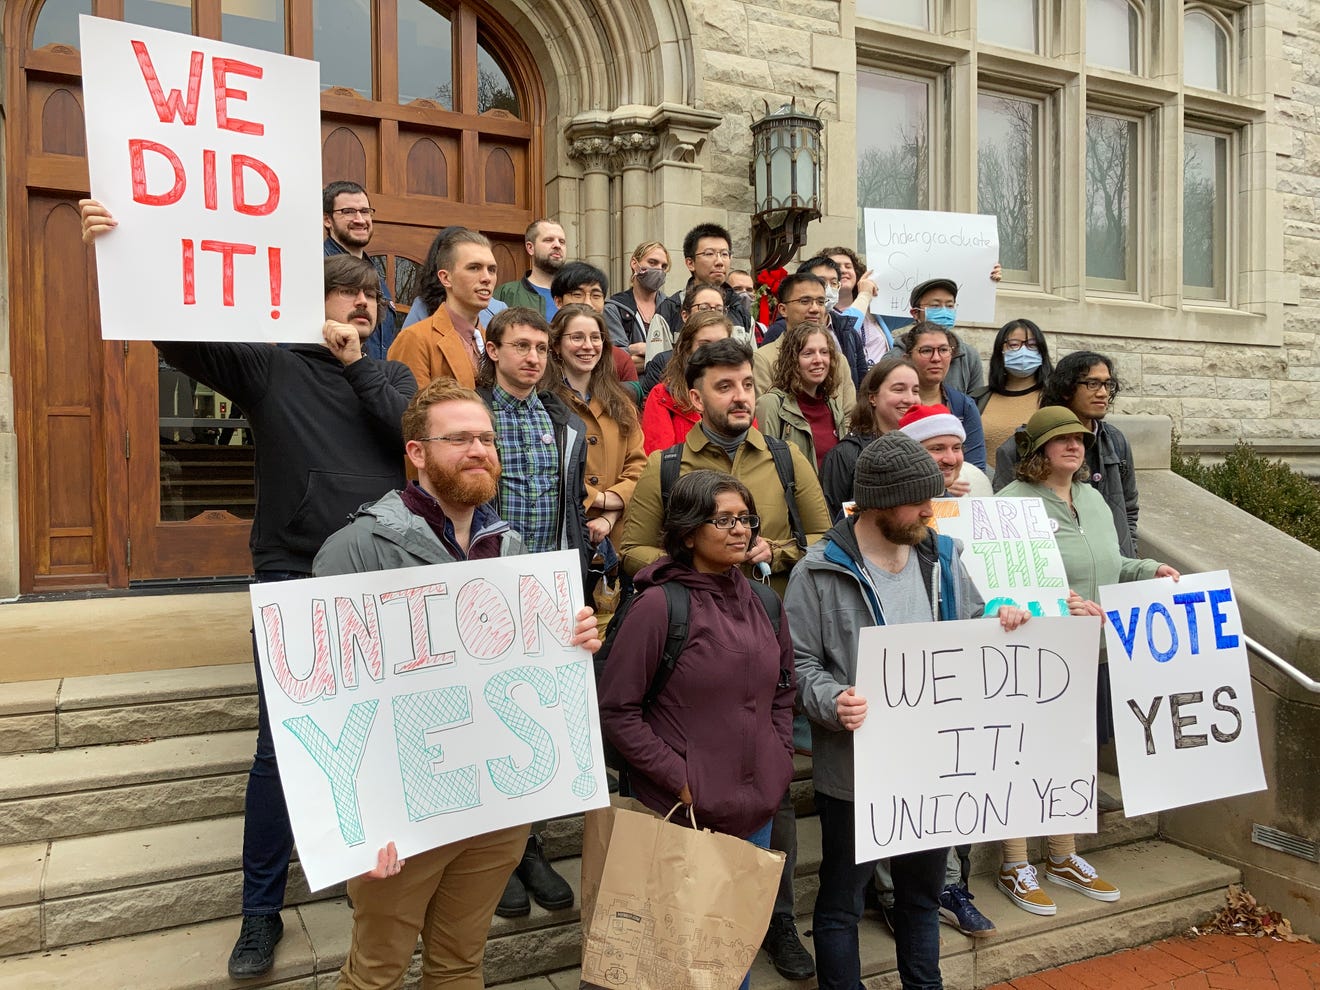 Members of the Indiana Grad Workers Coalition with signs reading We Did It, Union Yes and Vote Yes